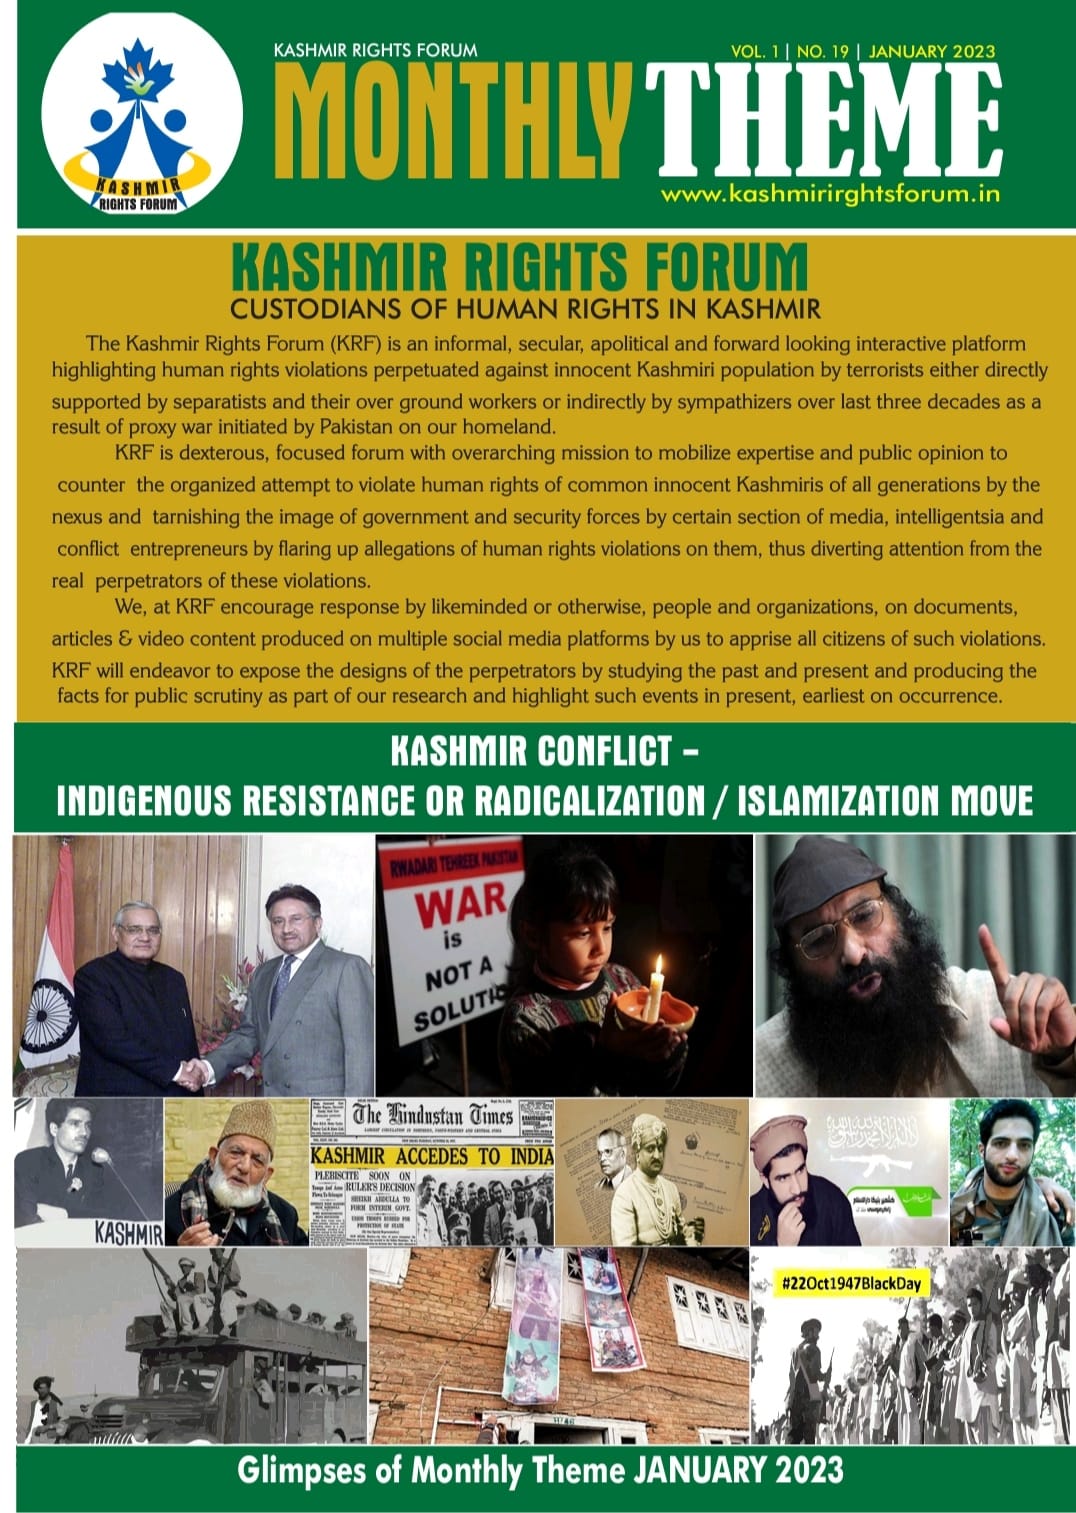 A preview of Monthly theme January 2023 carrying a detailed report on Kashmir Conflict. The report comprises of an analysis of whether the conflict in kashmir is an indigenous or a radicalization move from pakistan.